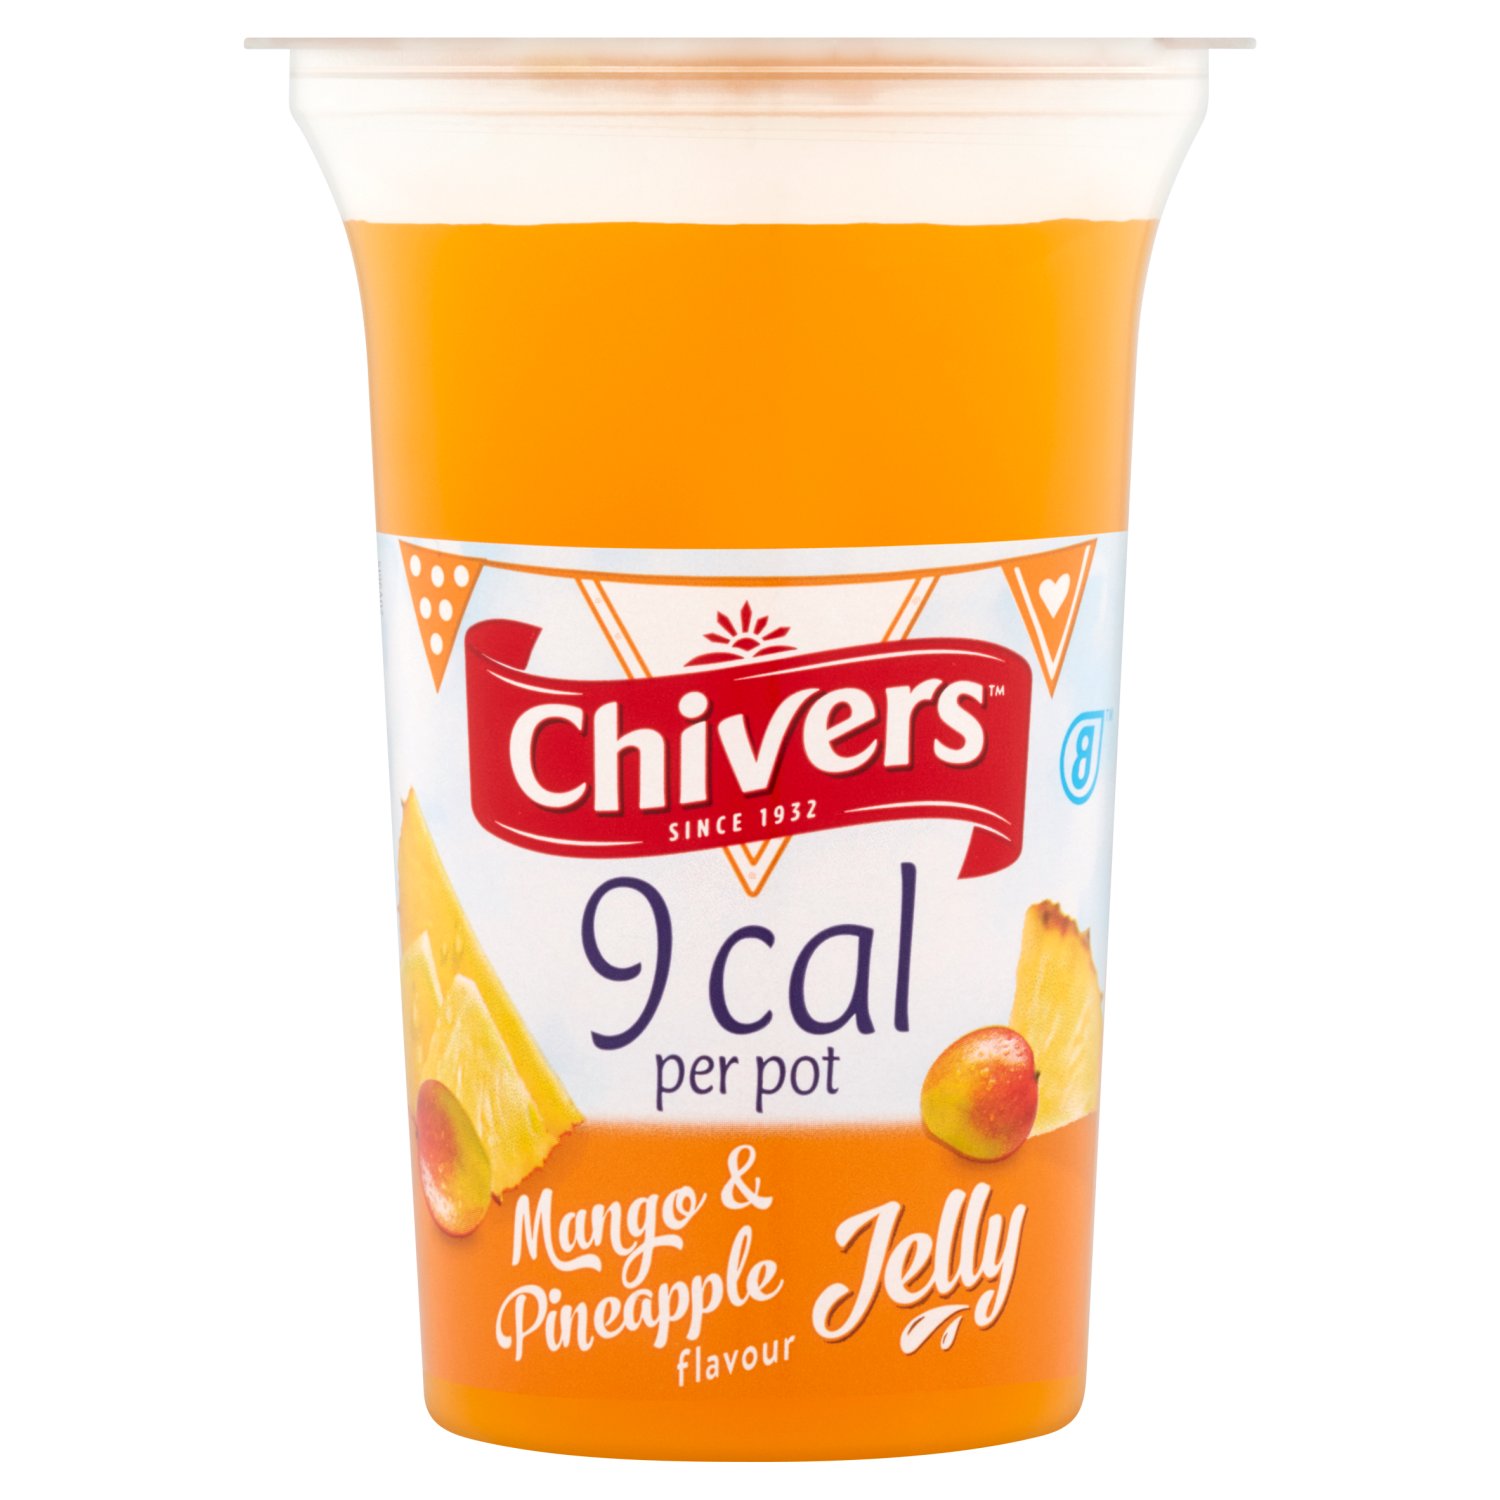 Chivers 9 Calorie Mango & Pineapple Jelly Pot (150 g)